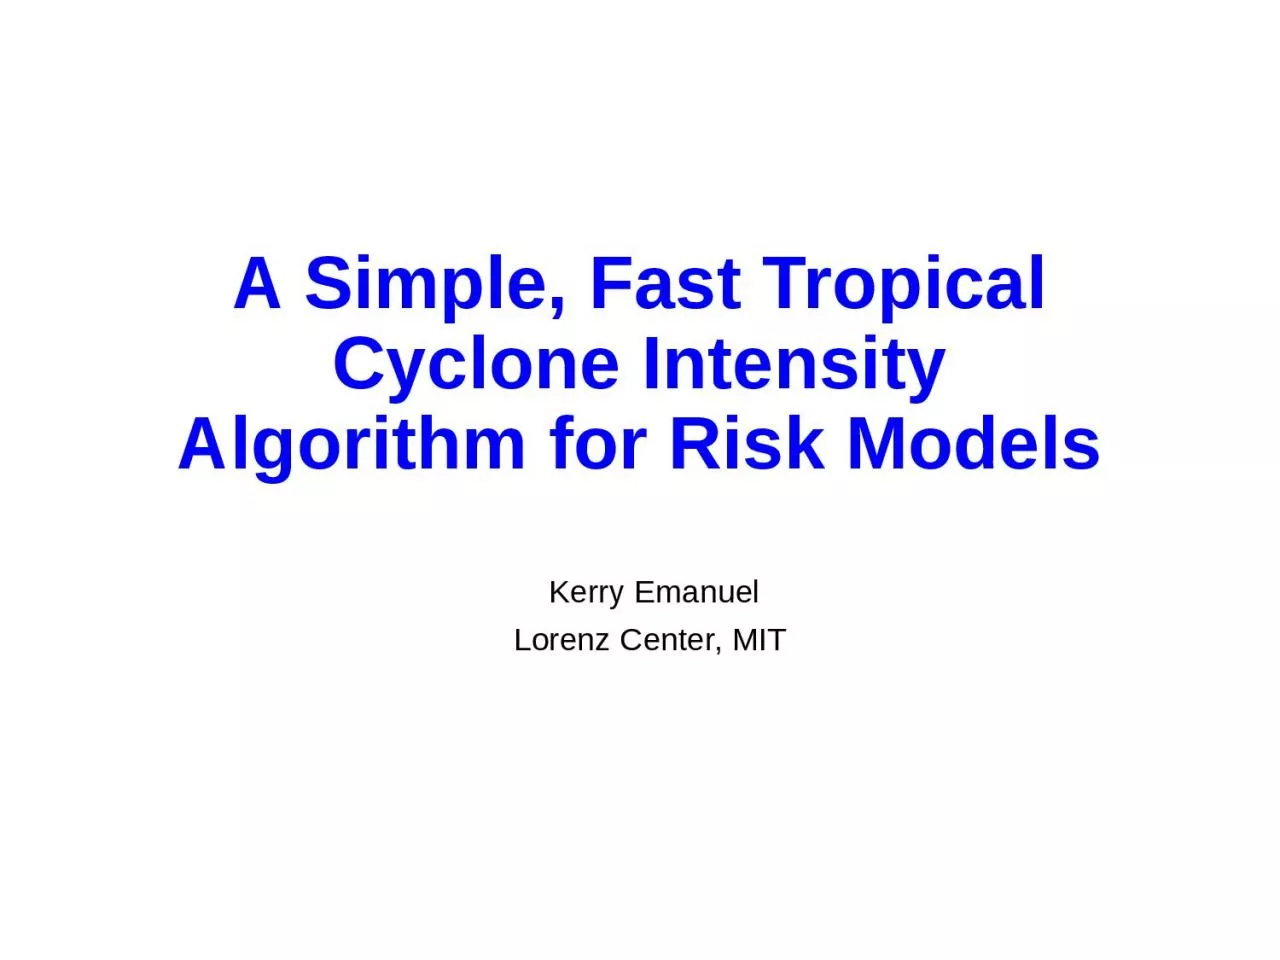 A Simple, Fast Tropical Cyclone Intensity Algorithm for Risk Models